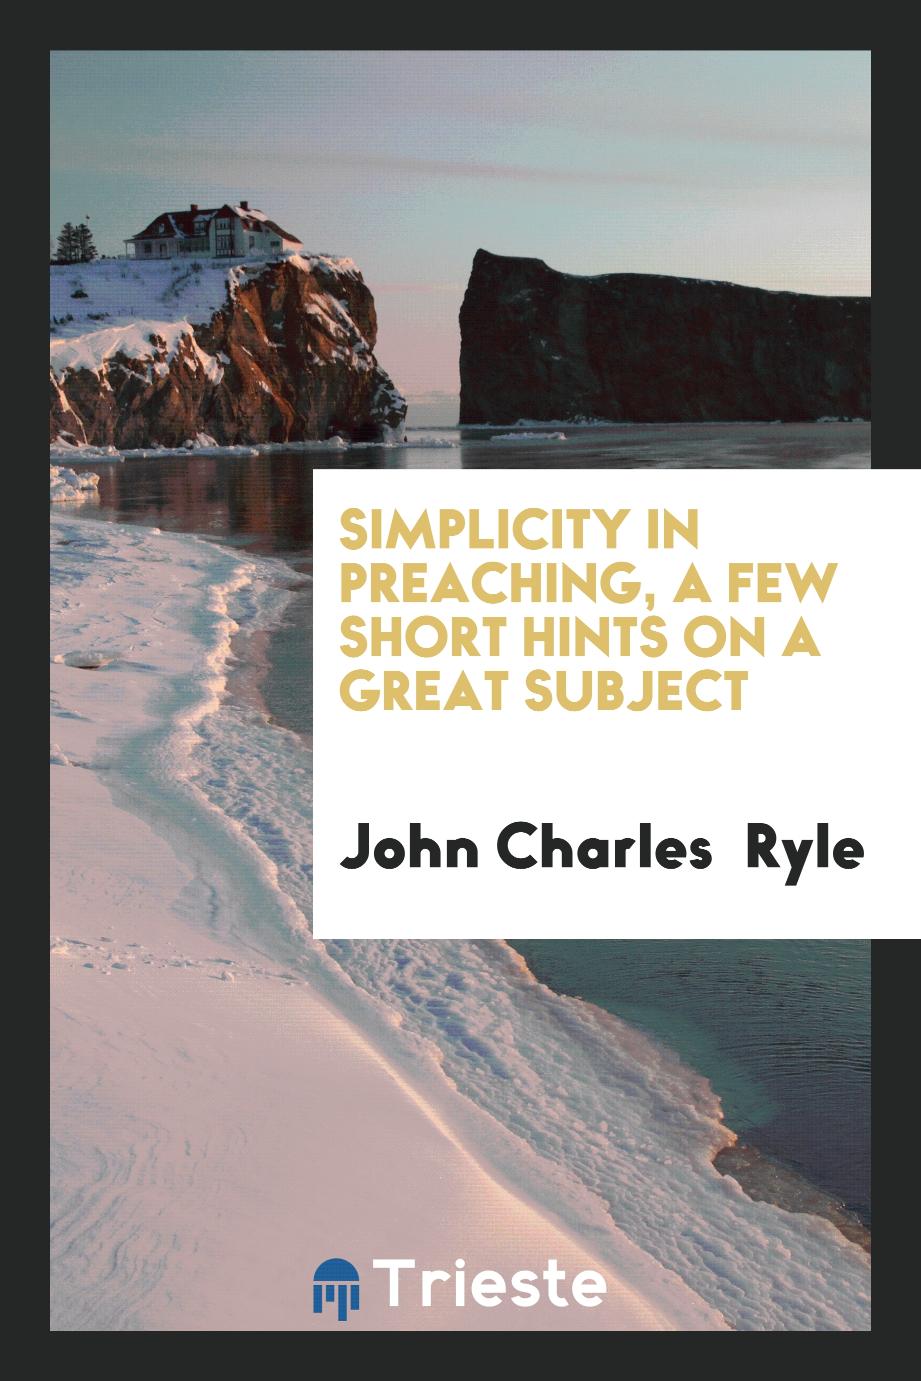 Simplicity in preaching, a few short hints on a great subject